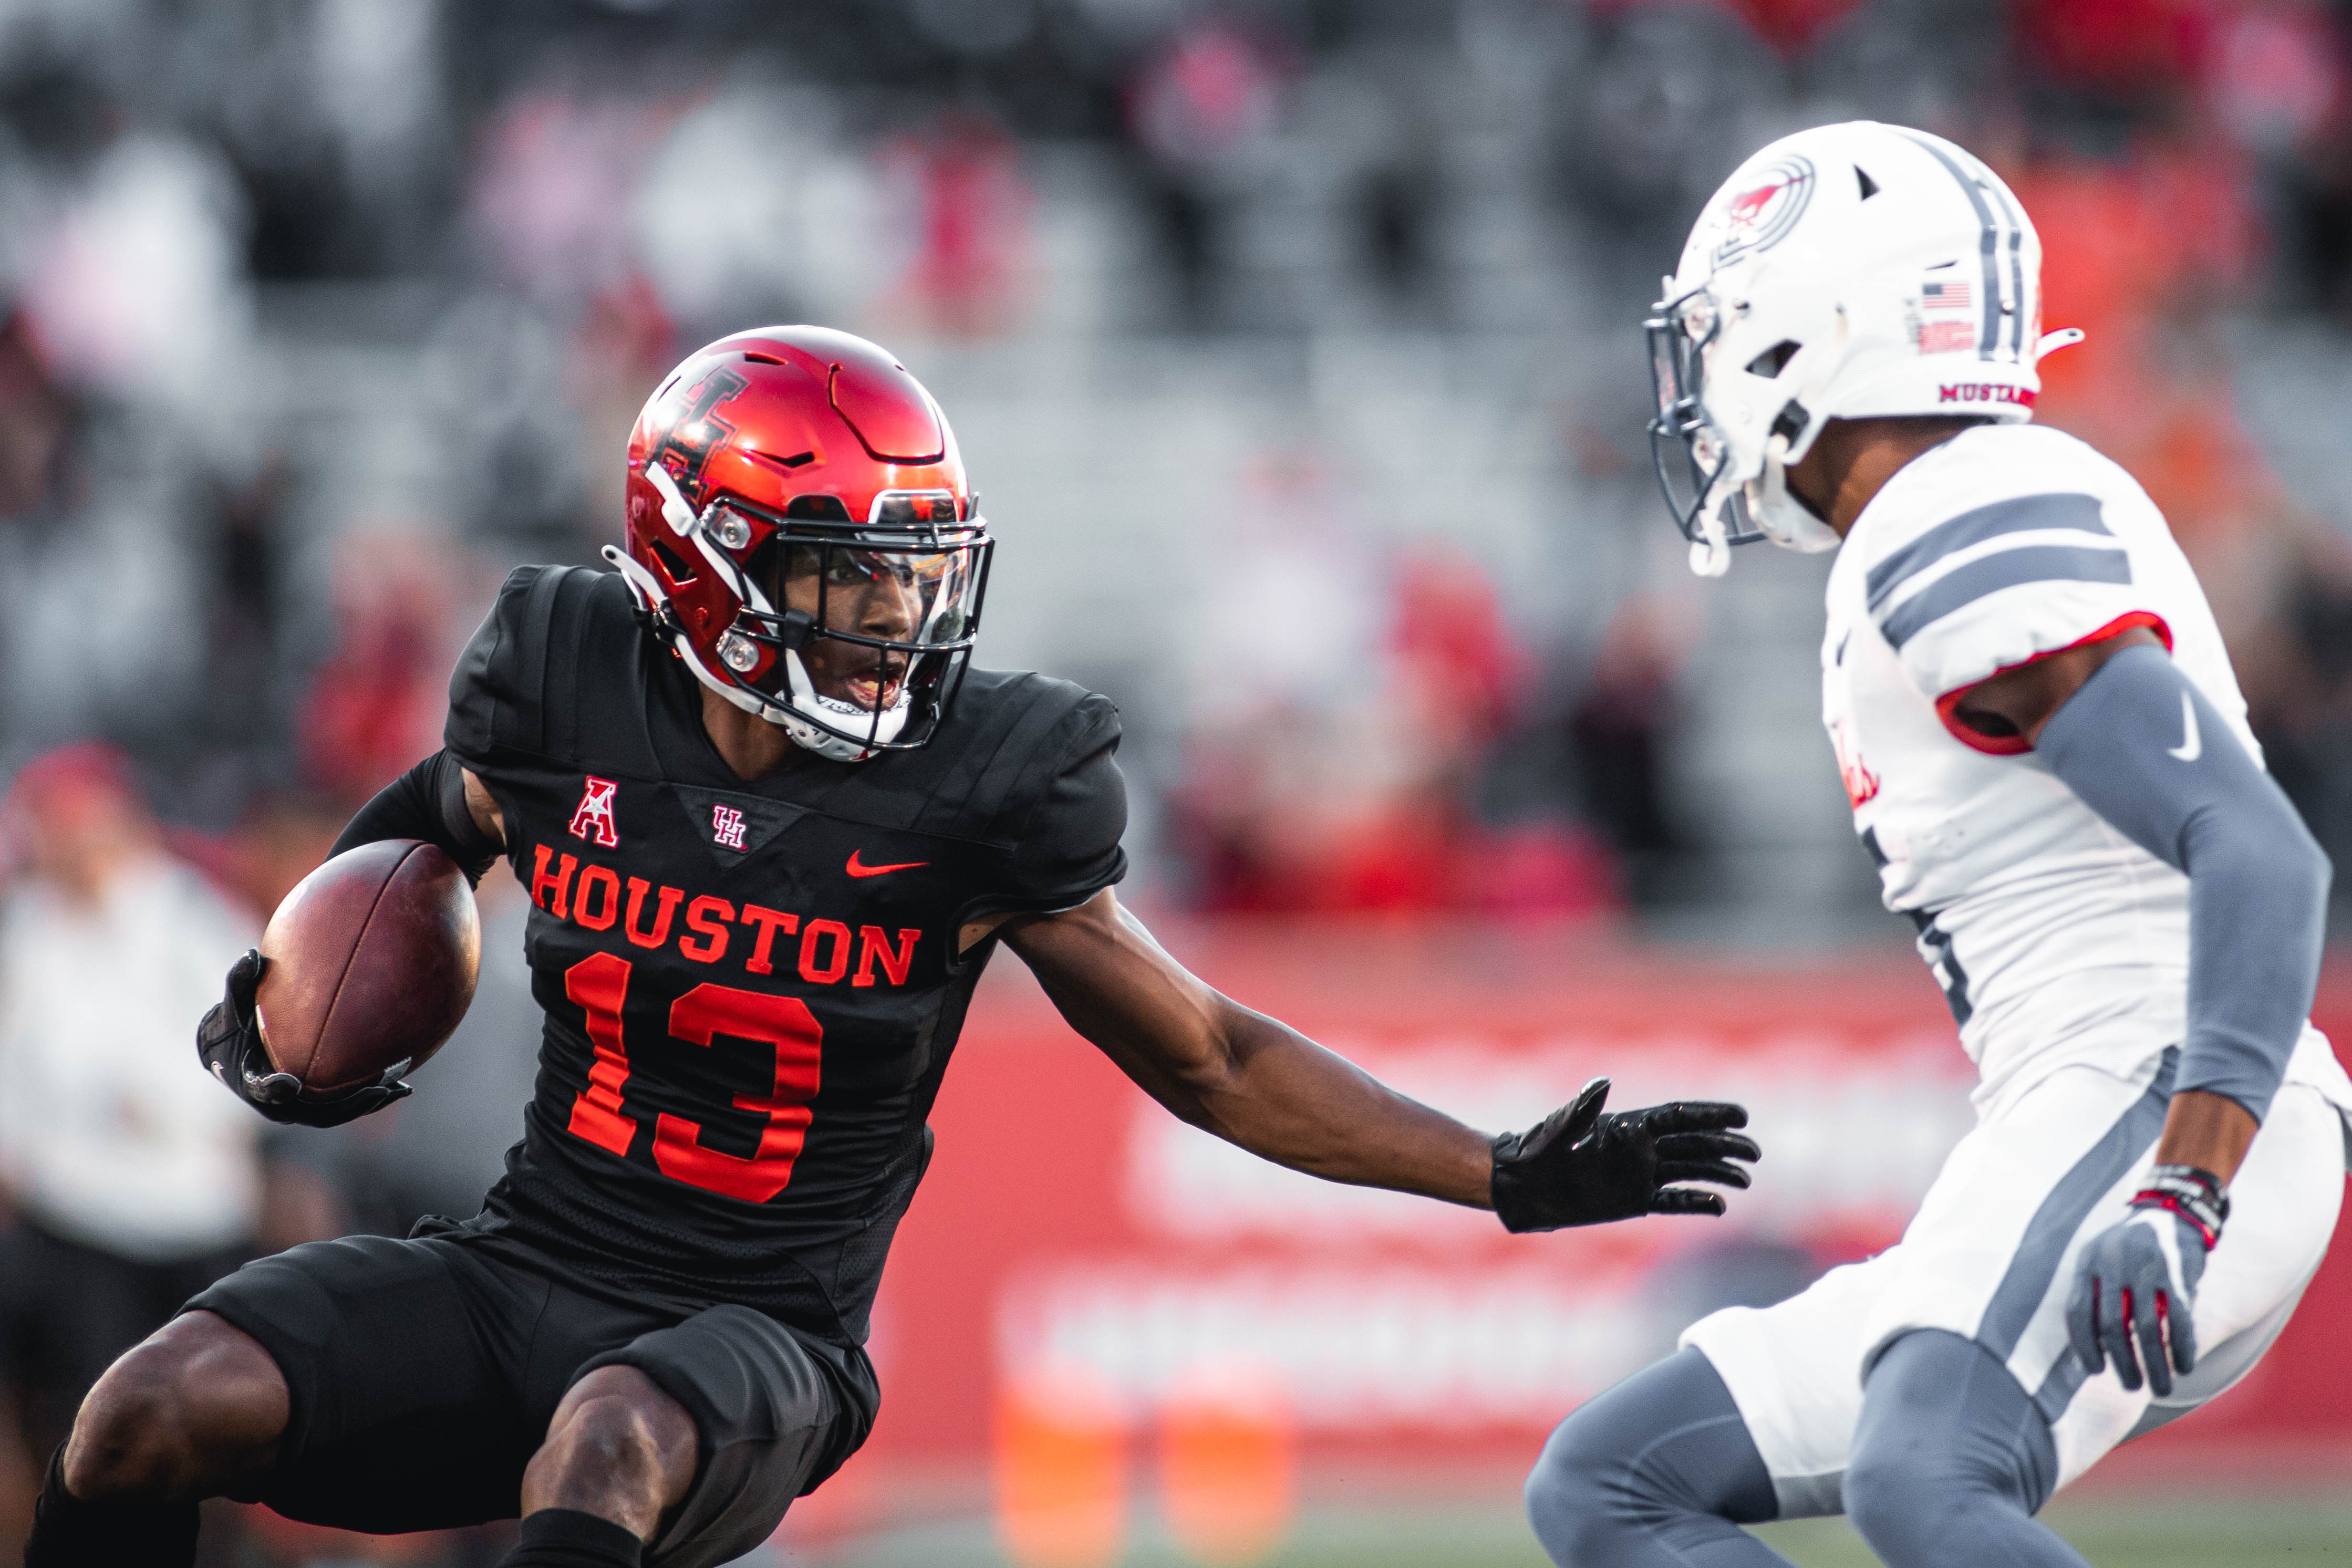 Houston weekend sports: UH new uniforms